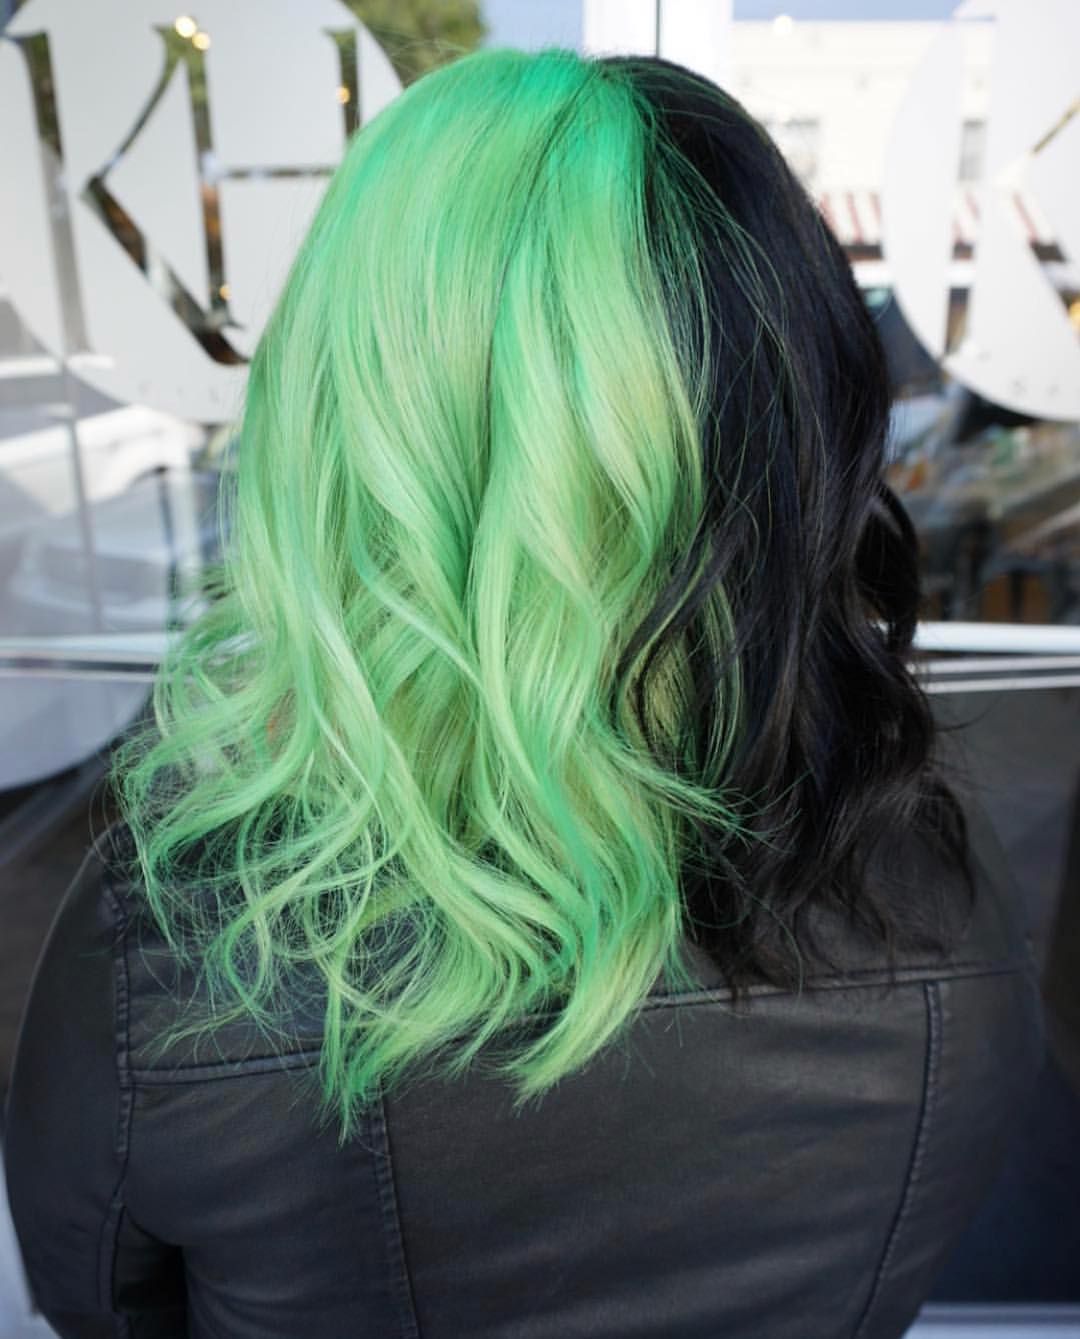 betsy riddell recommends half black half neon green hair pic